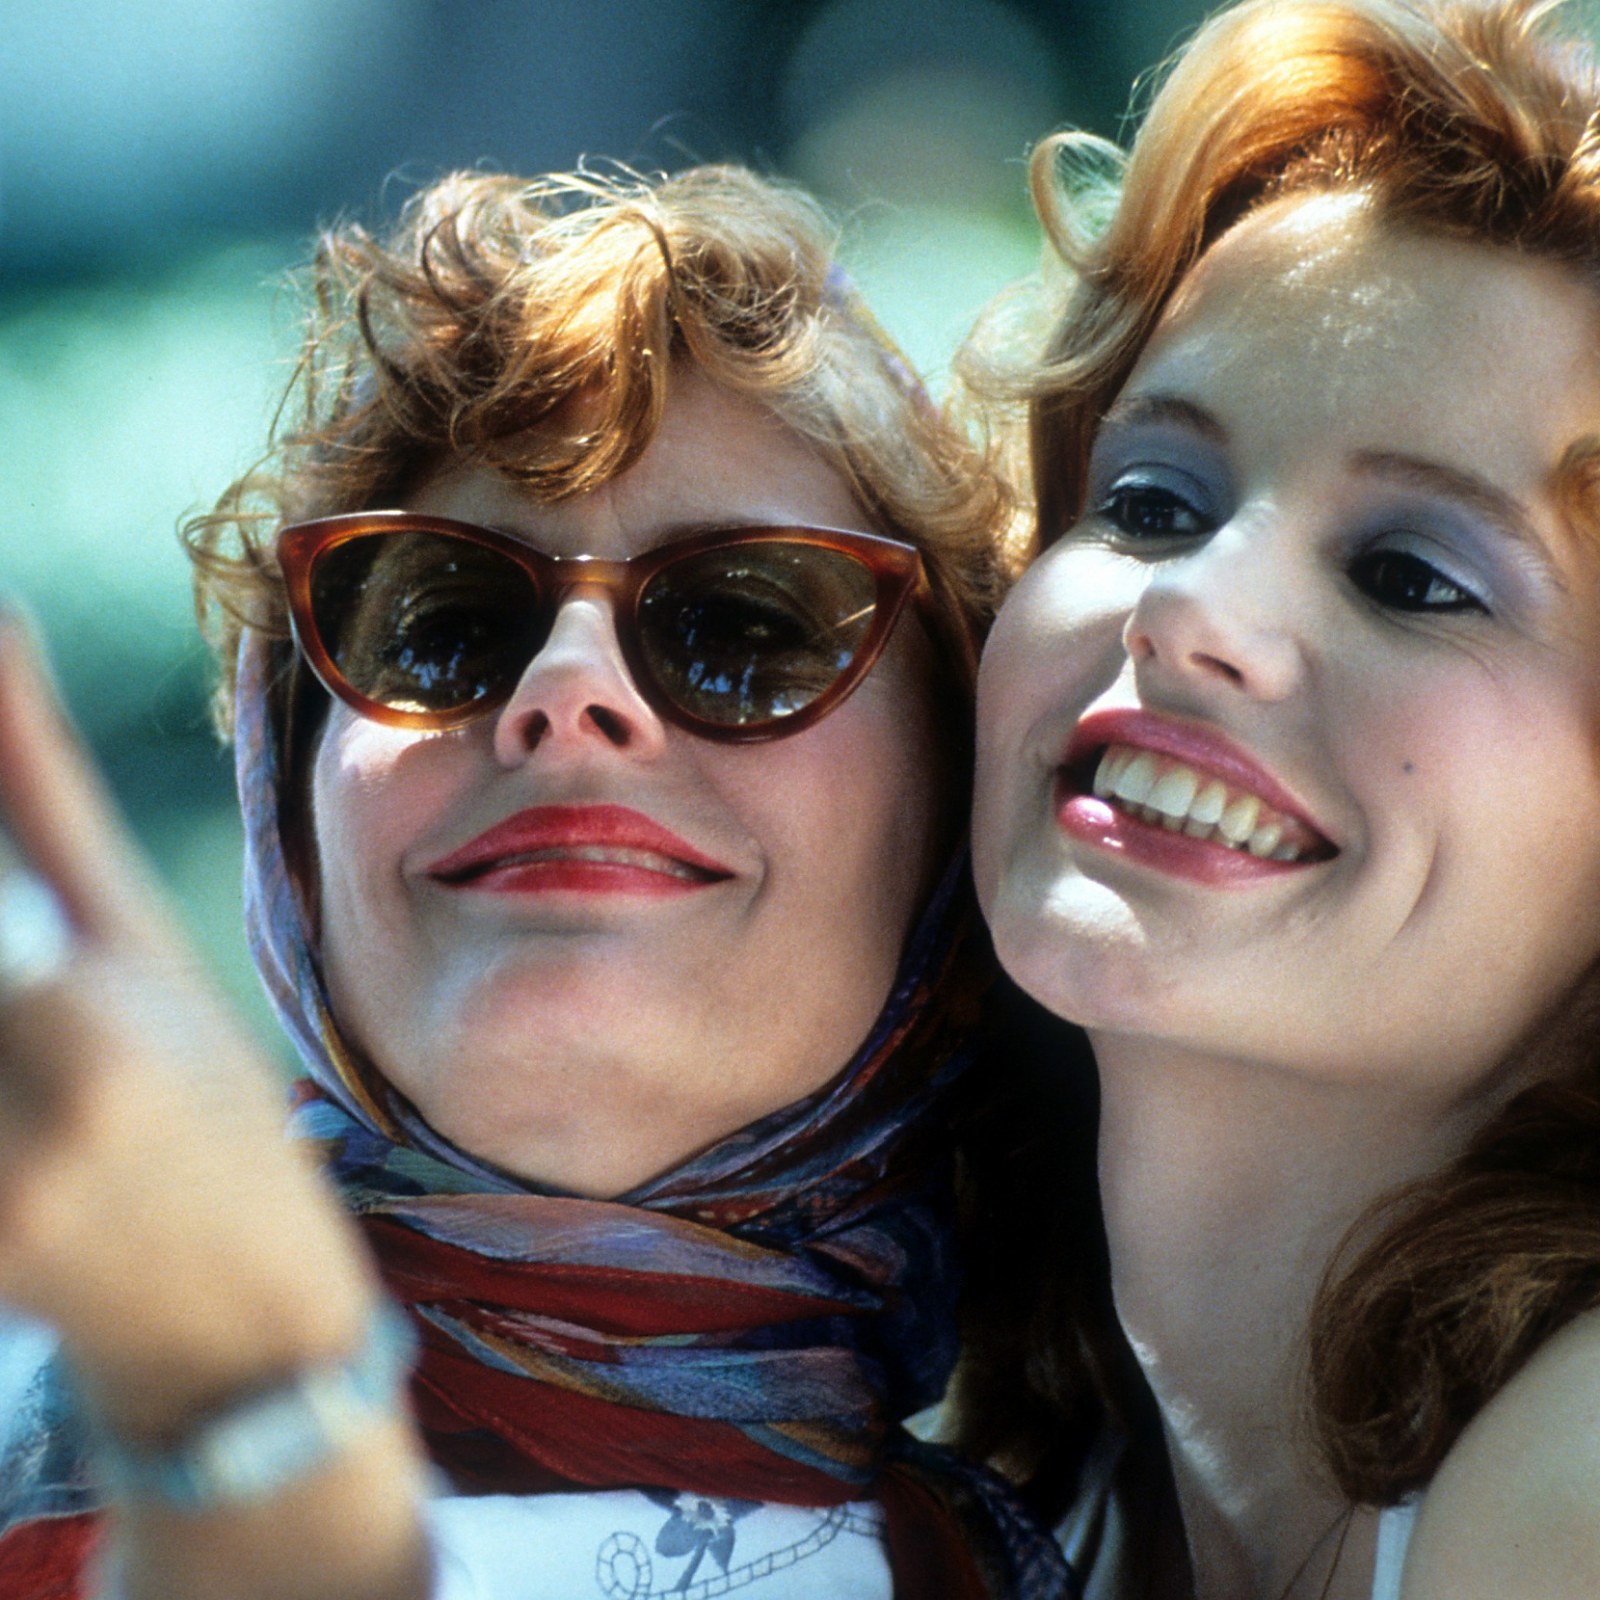 Thelma Louise 30th Anniversary, Thelma Louise Meaning